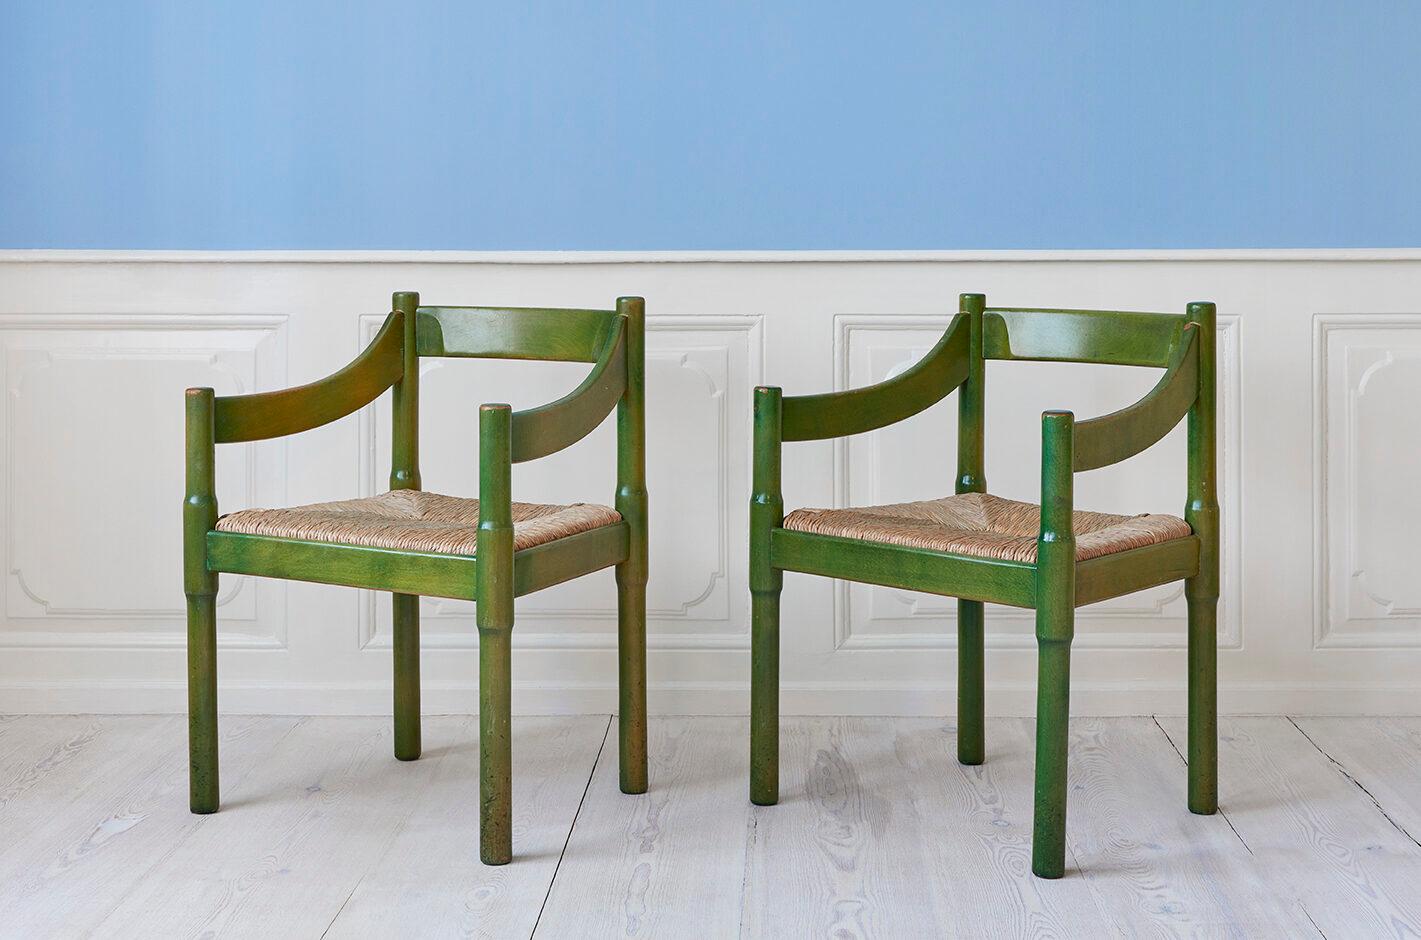 Vico Magistretti
Italy, 1959

A set of four Carimate armchairs. Wood with transparent green paint and wicker seat.

Size: H 75 x W 58 x D 45 cm.